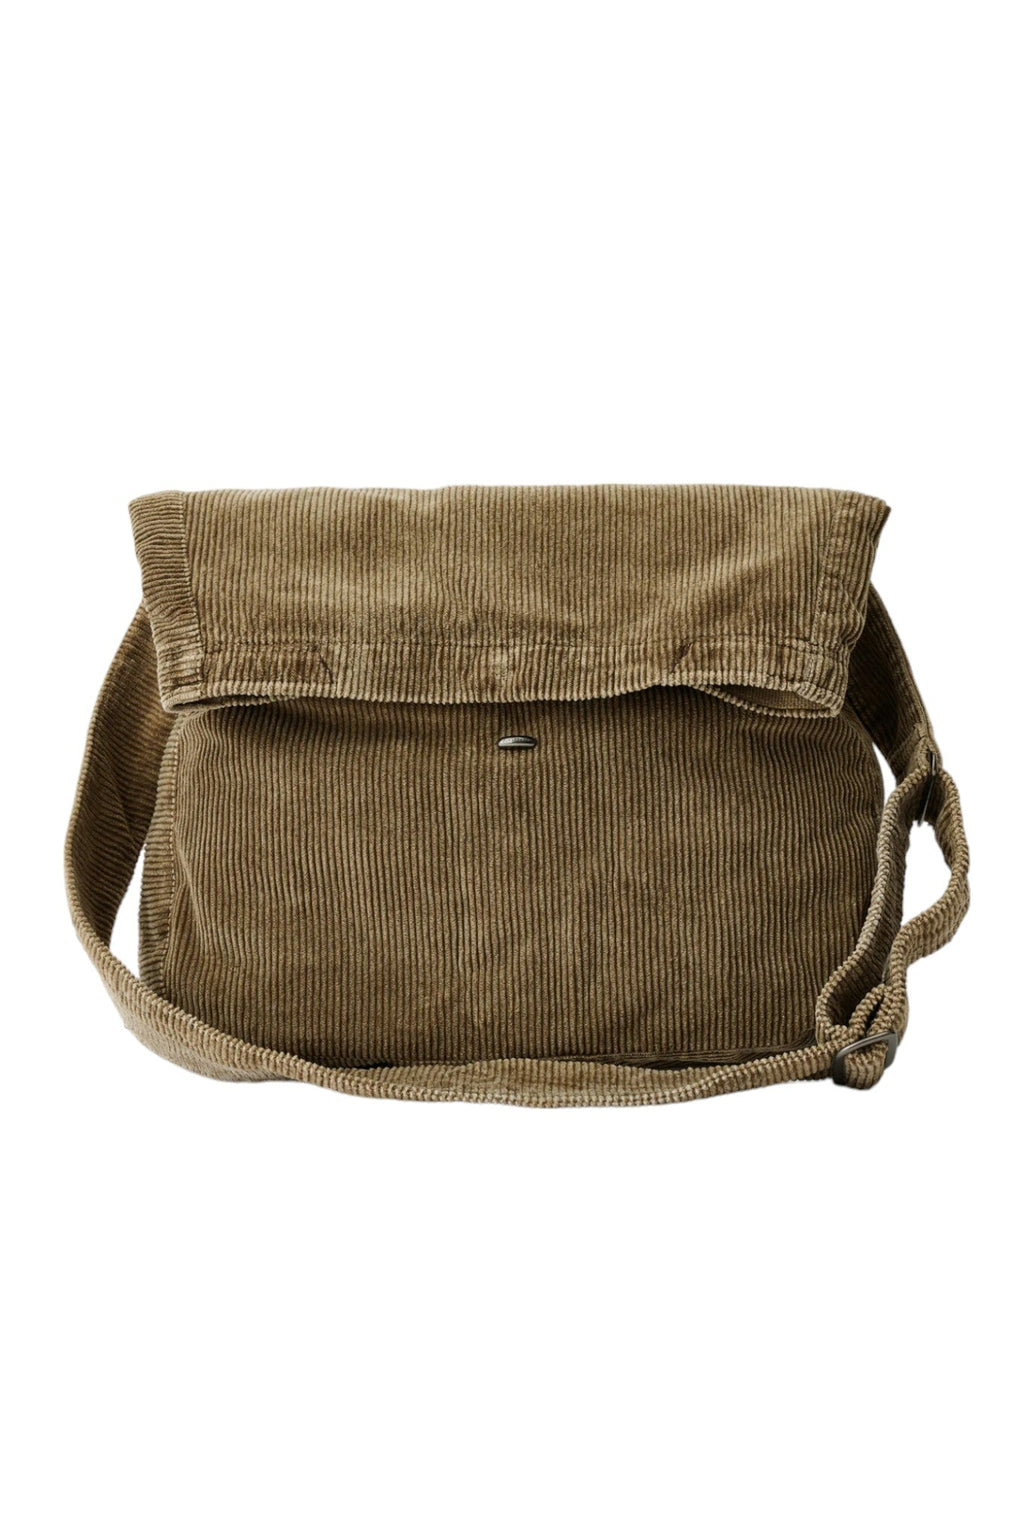 Our Legacy Sling Bag